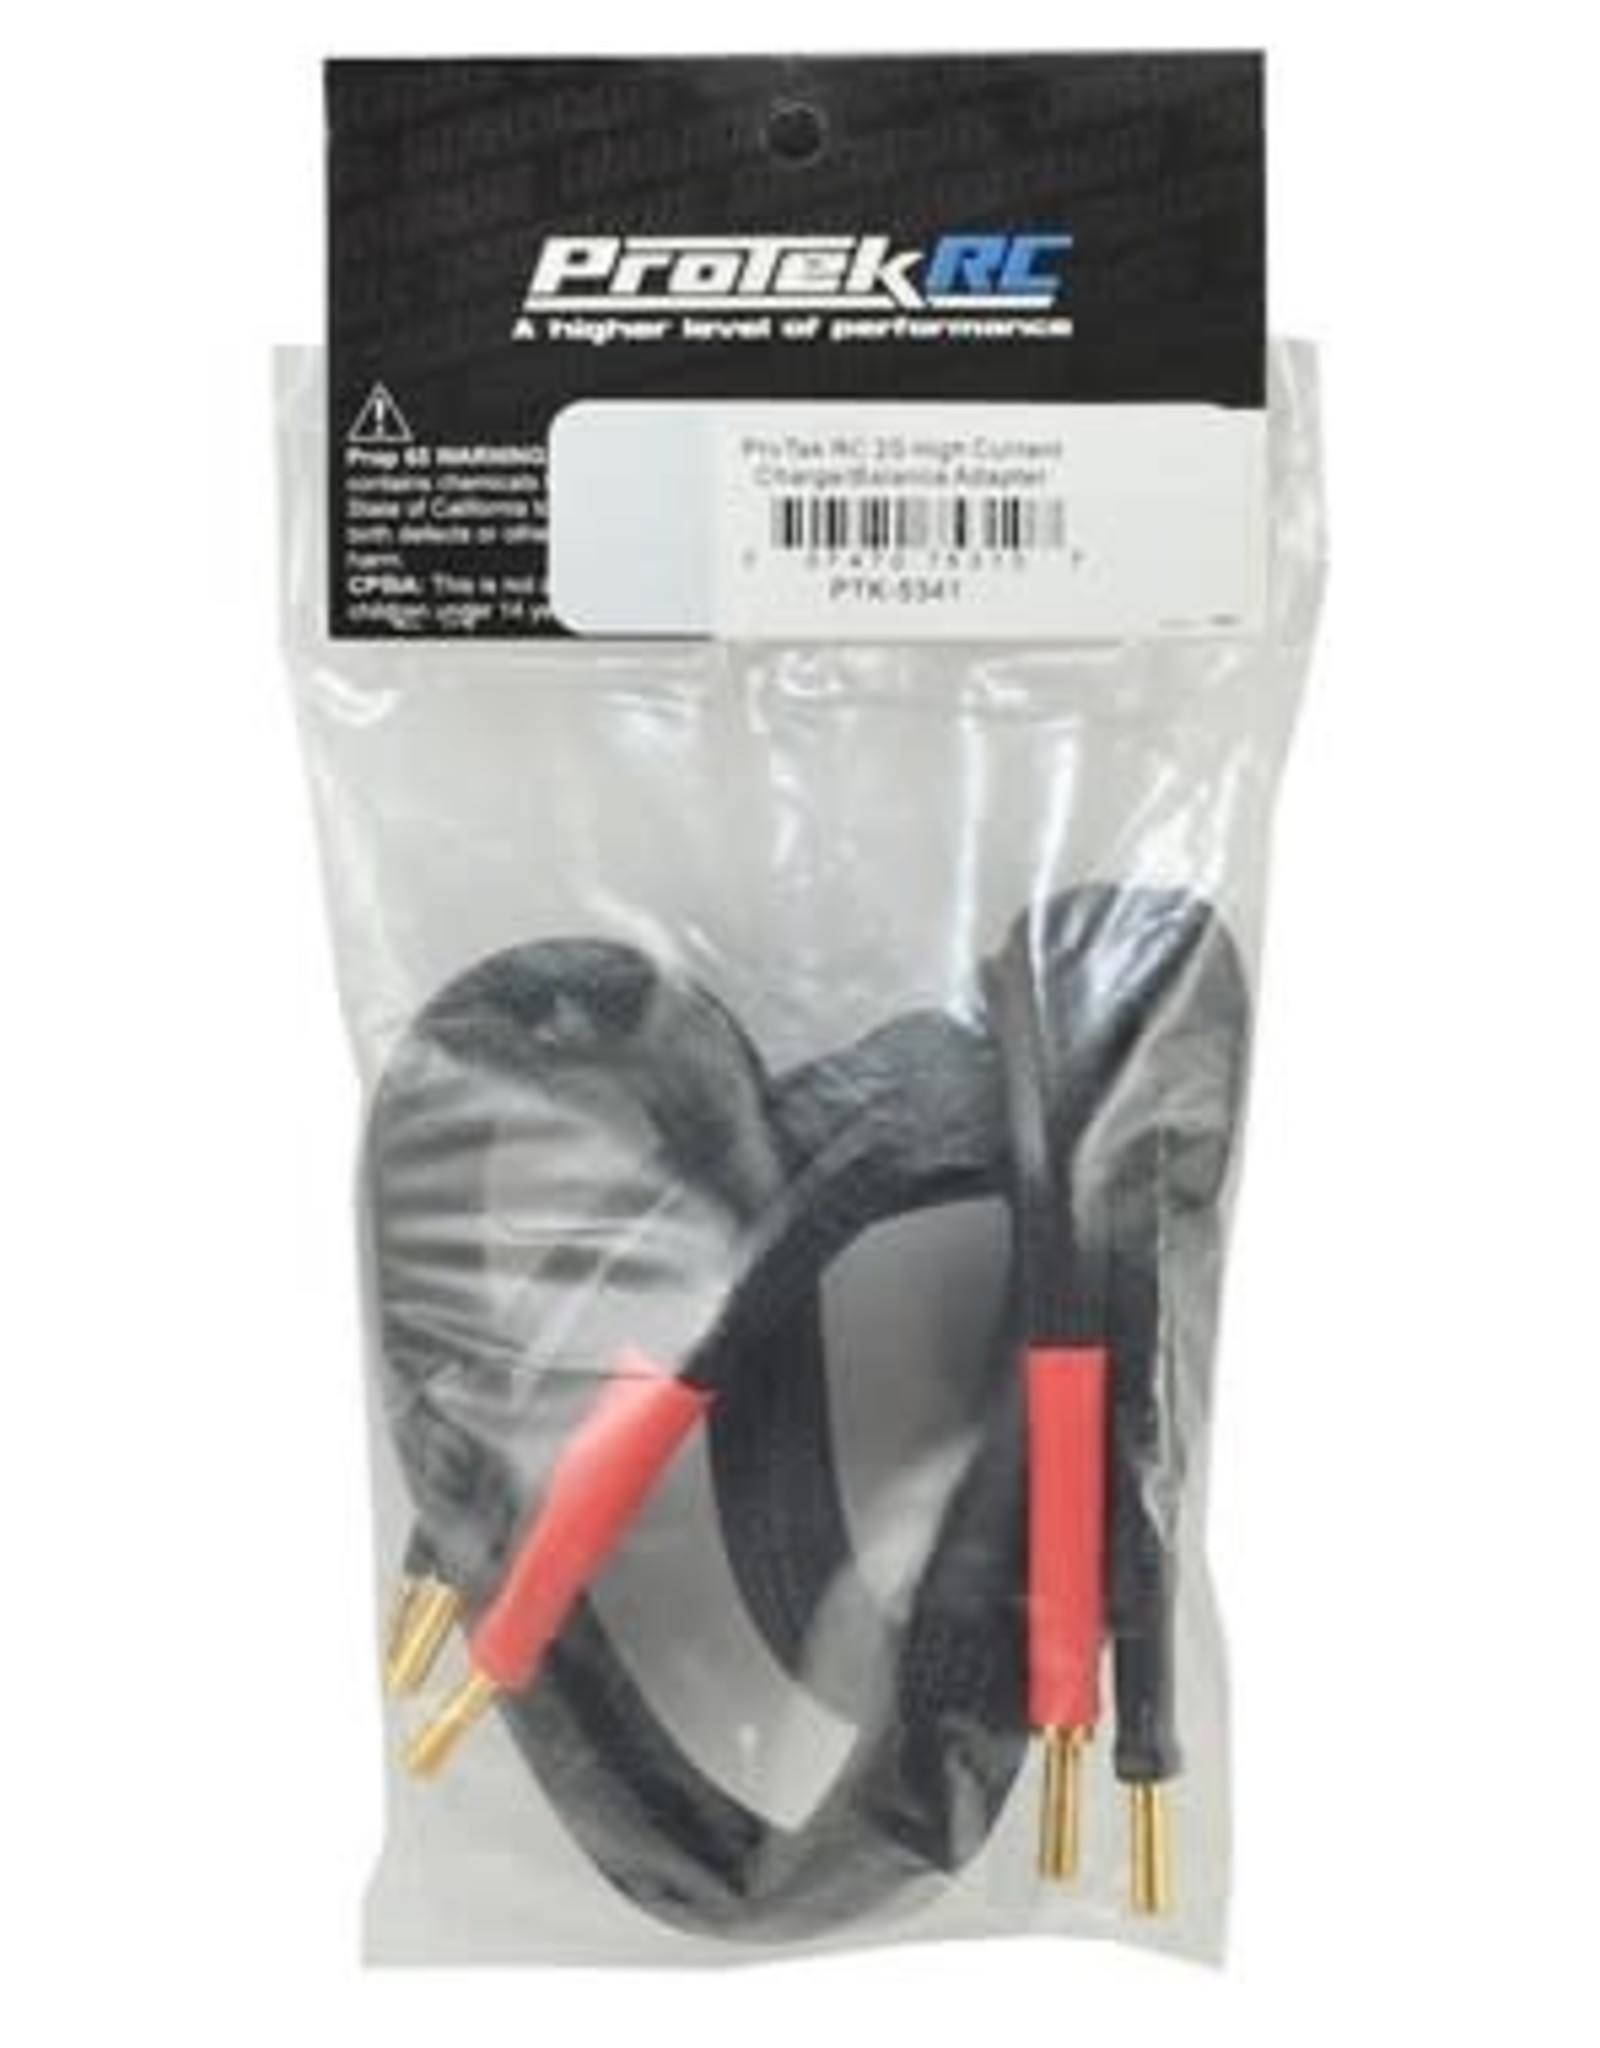 Protek RC ProTek RC 2S High Current Charge/Balance Adapter (4mm to 4mm Solid Bullets) [PTK-5341]